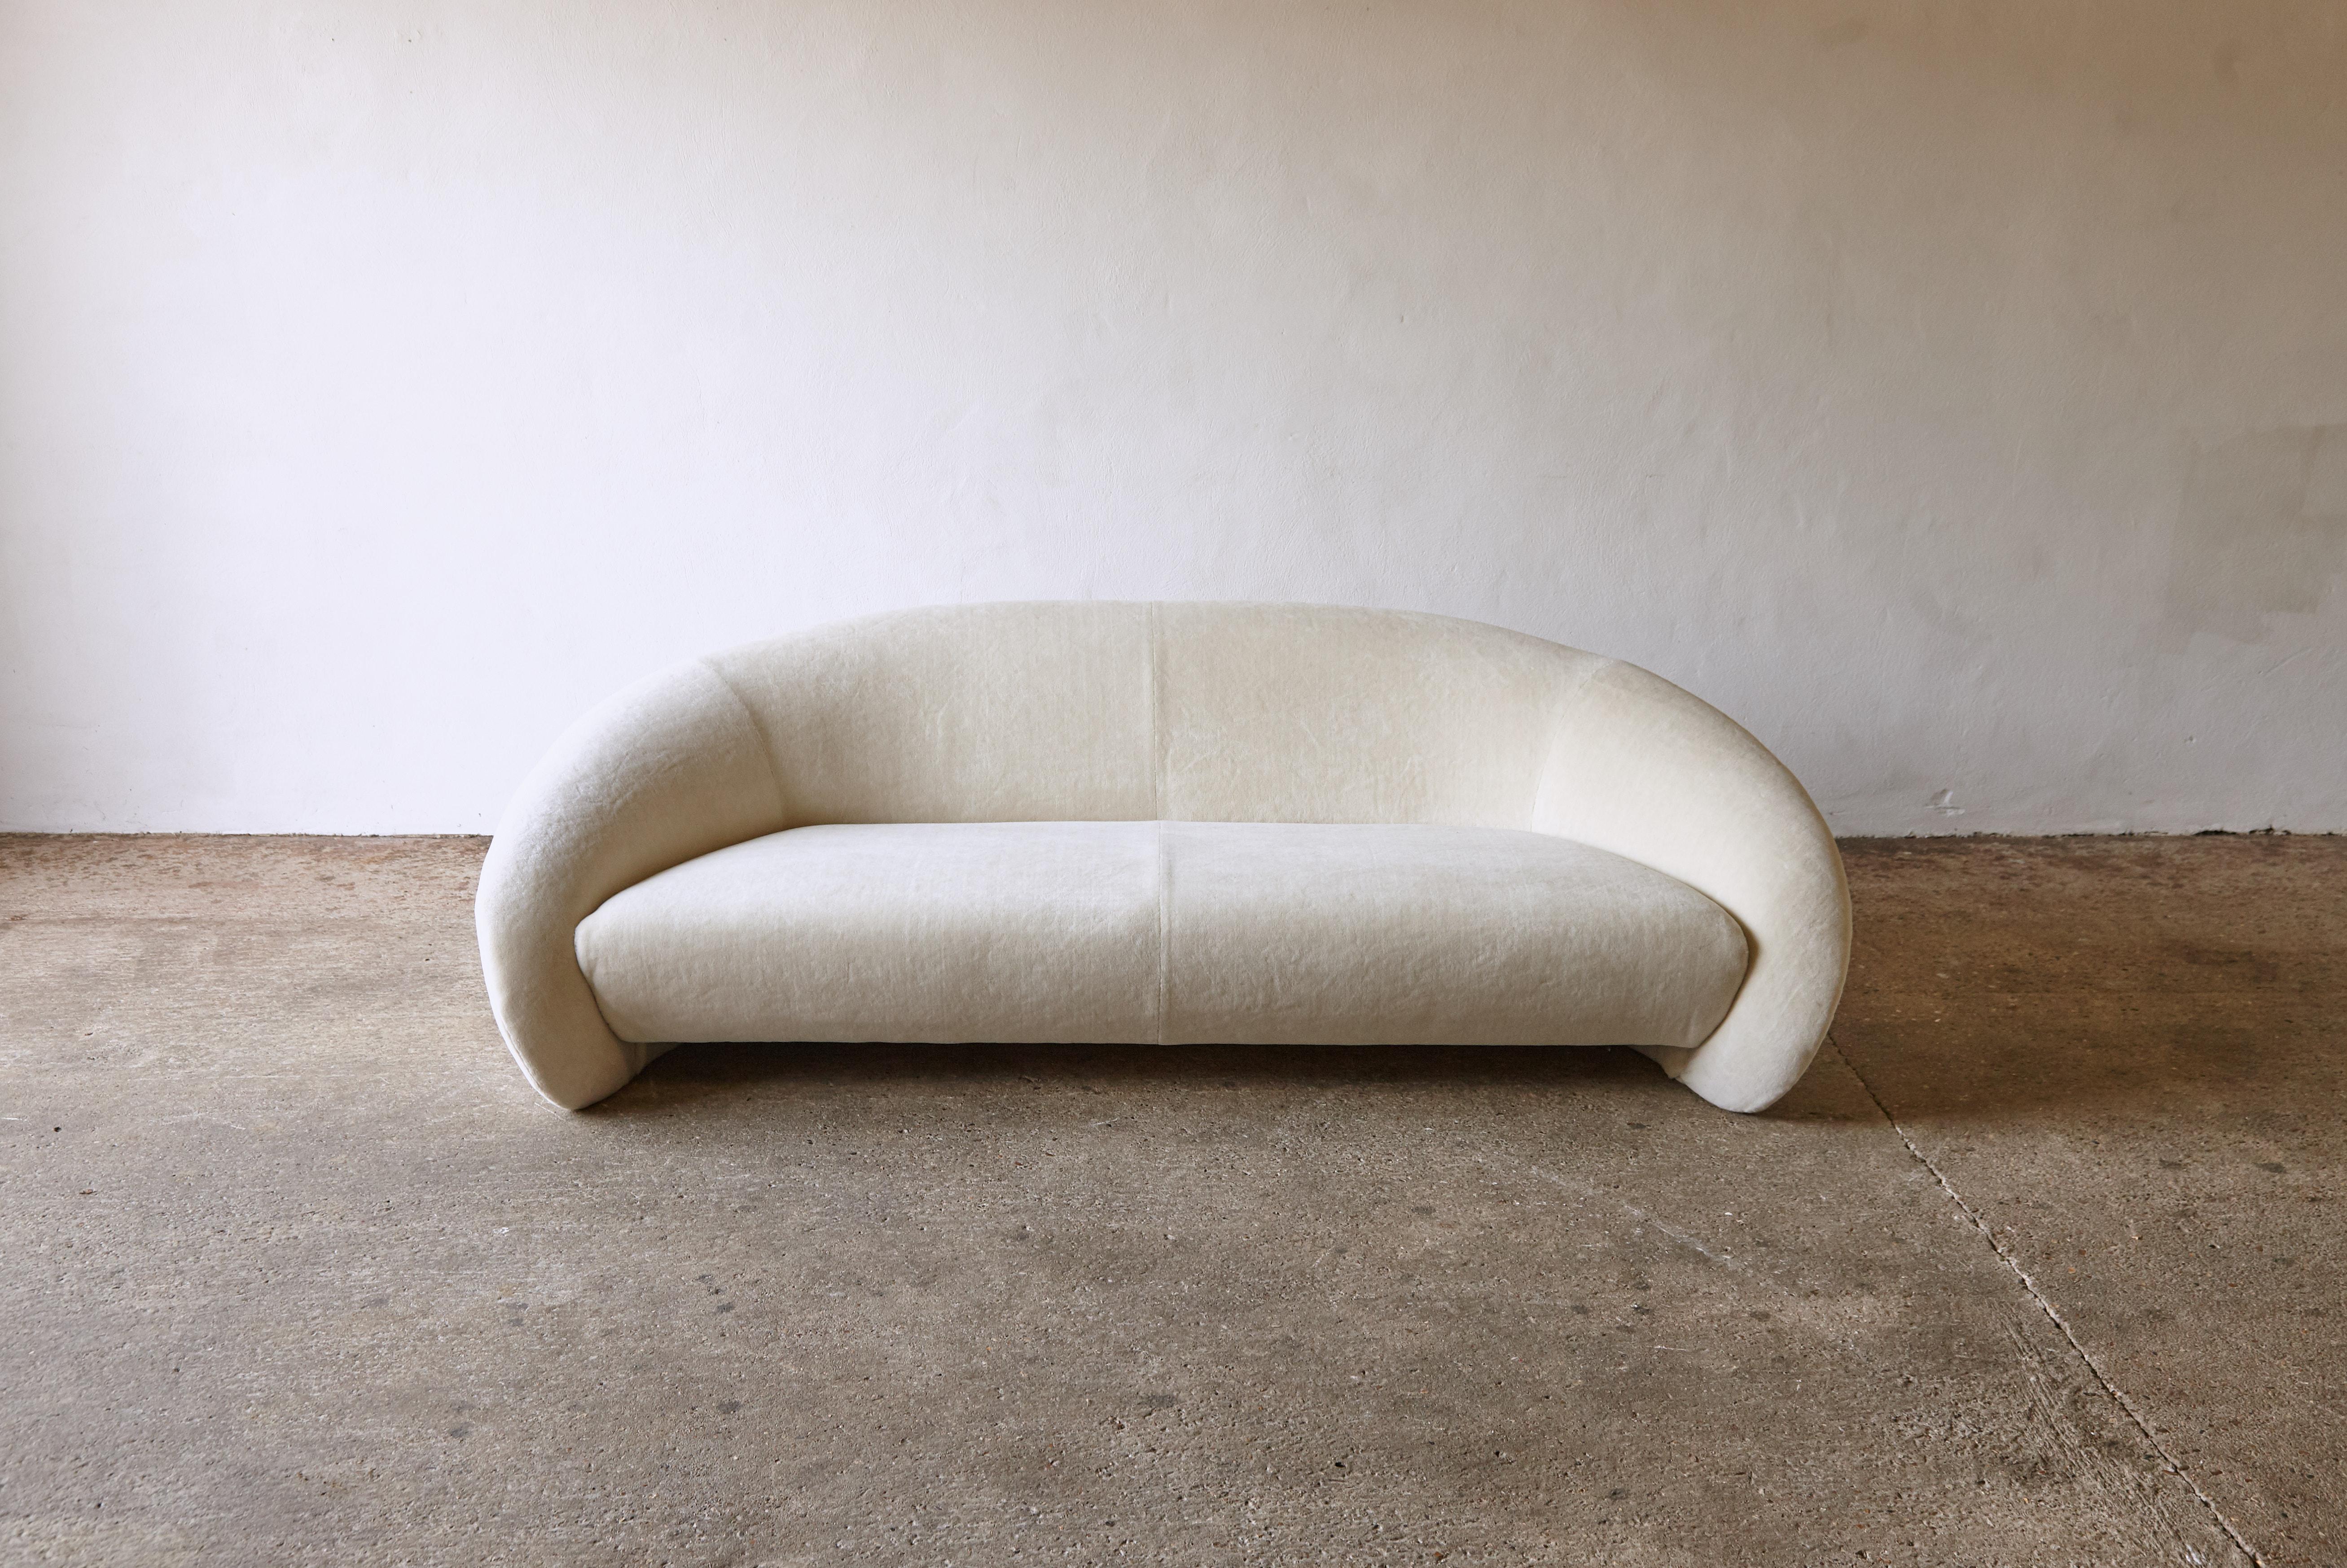 A superb rare Italian curved sofa or organic form, late 1970s-early 1980s, Italy. Newly reupholstered in thick cream alpaca velvet.




Please note: Prices do not include VAT. VAT may be applied depending on the ship-to location.
  